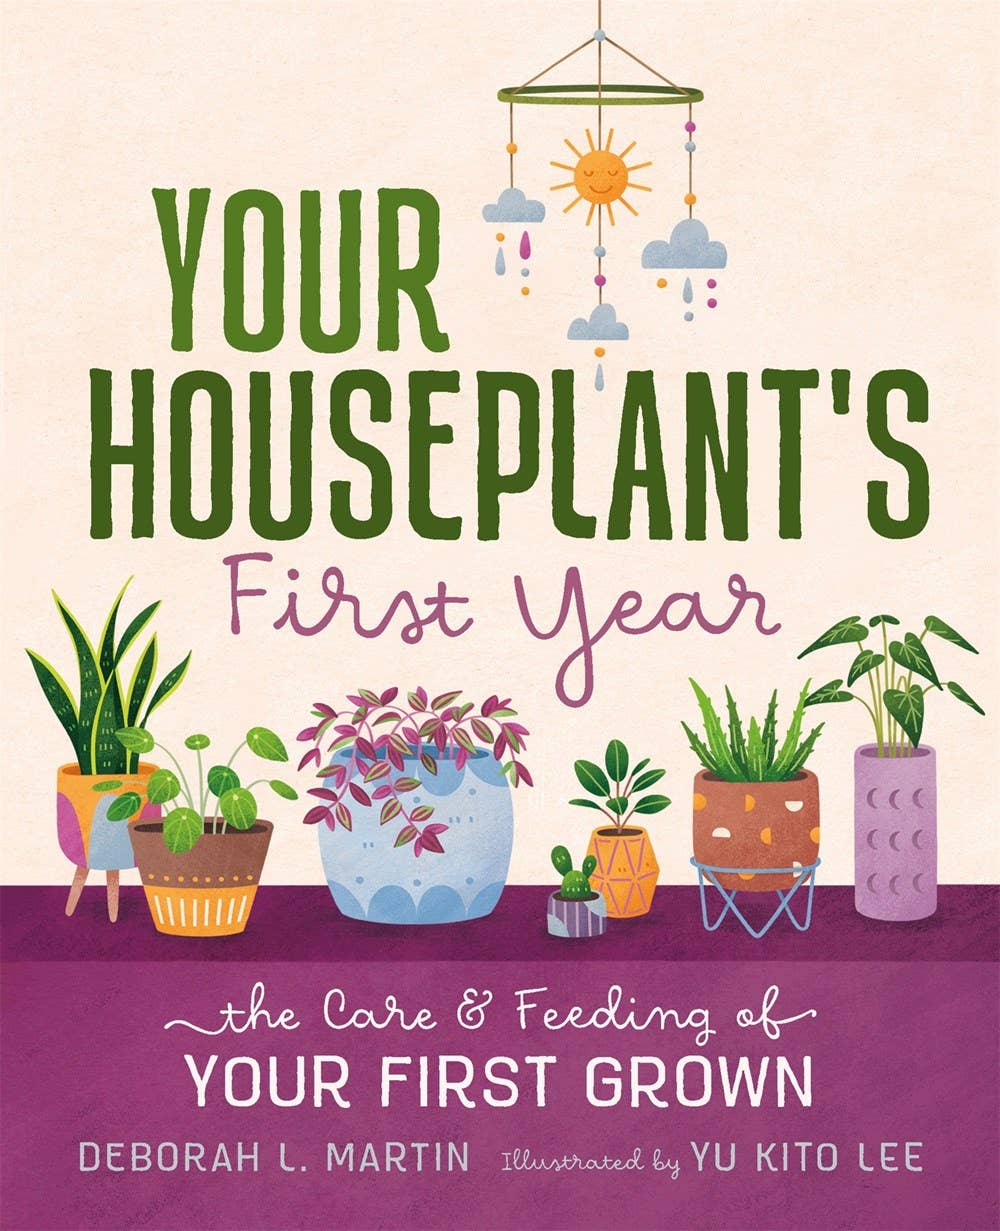 Your Houseplant's First Year: Care & Feeding First Grown